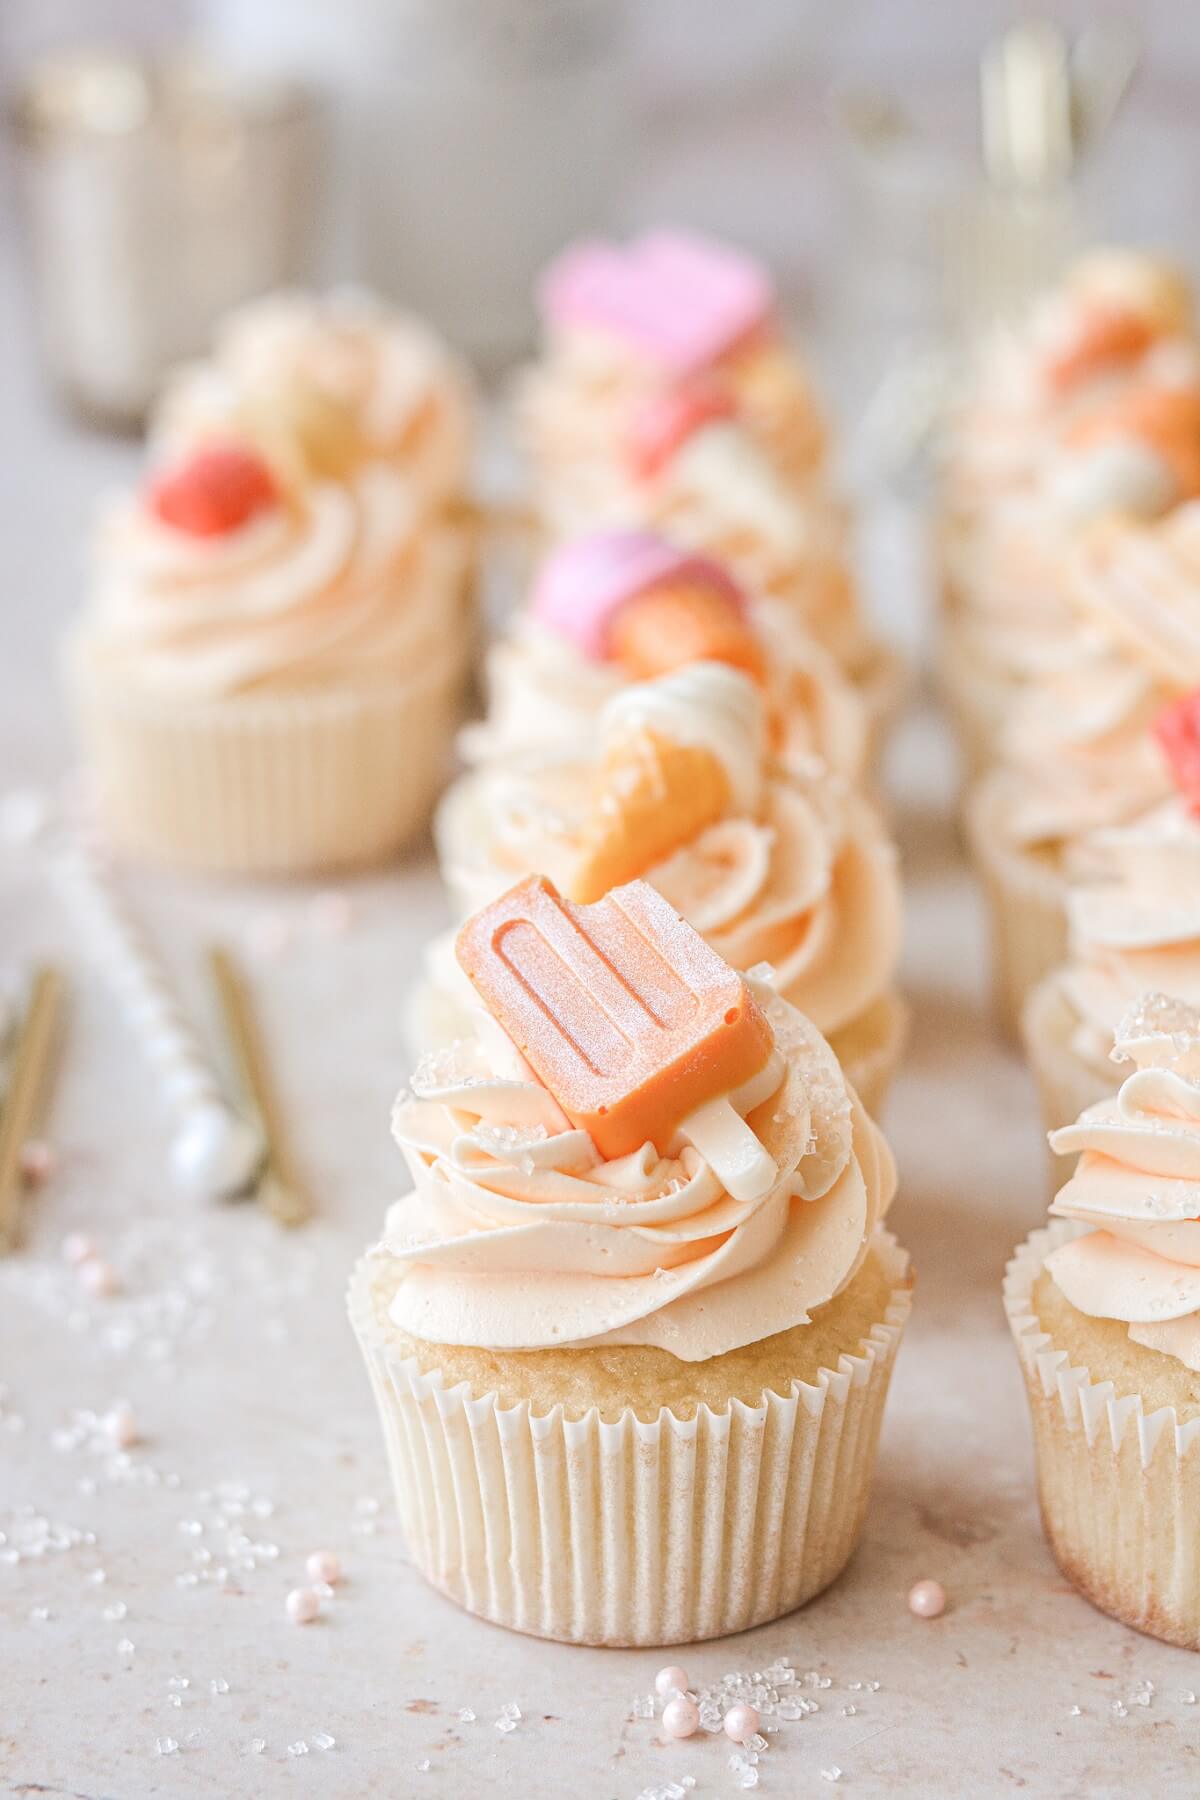 Popsicle cupcake topper on orange creamsicle cupcakes.